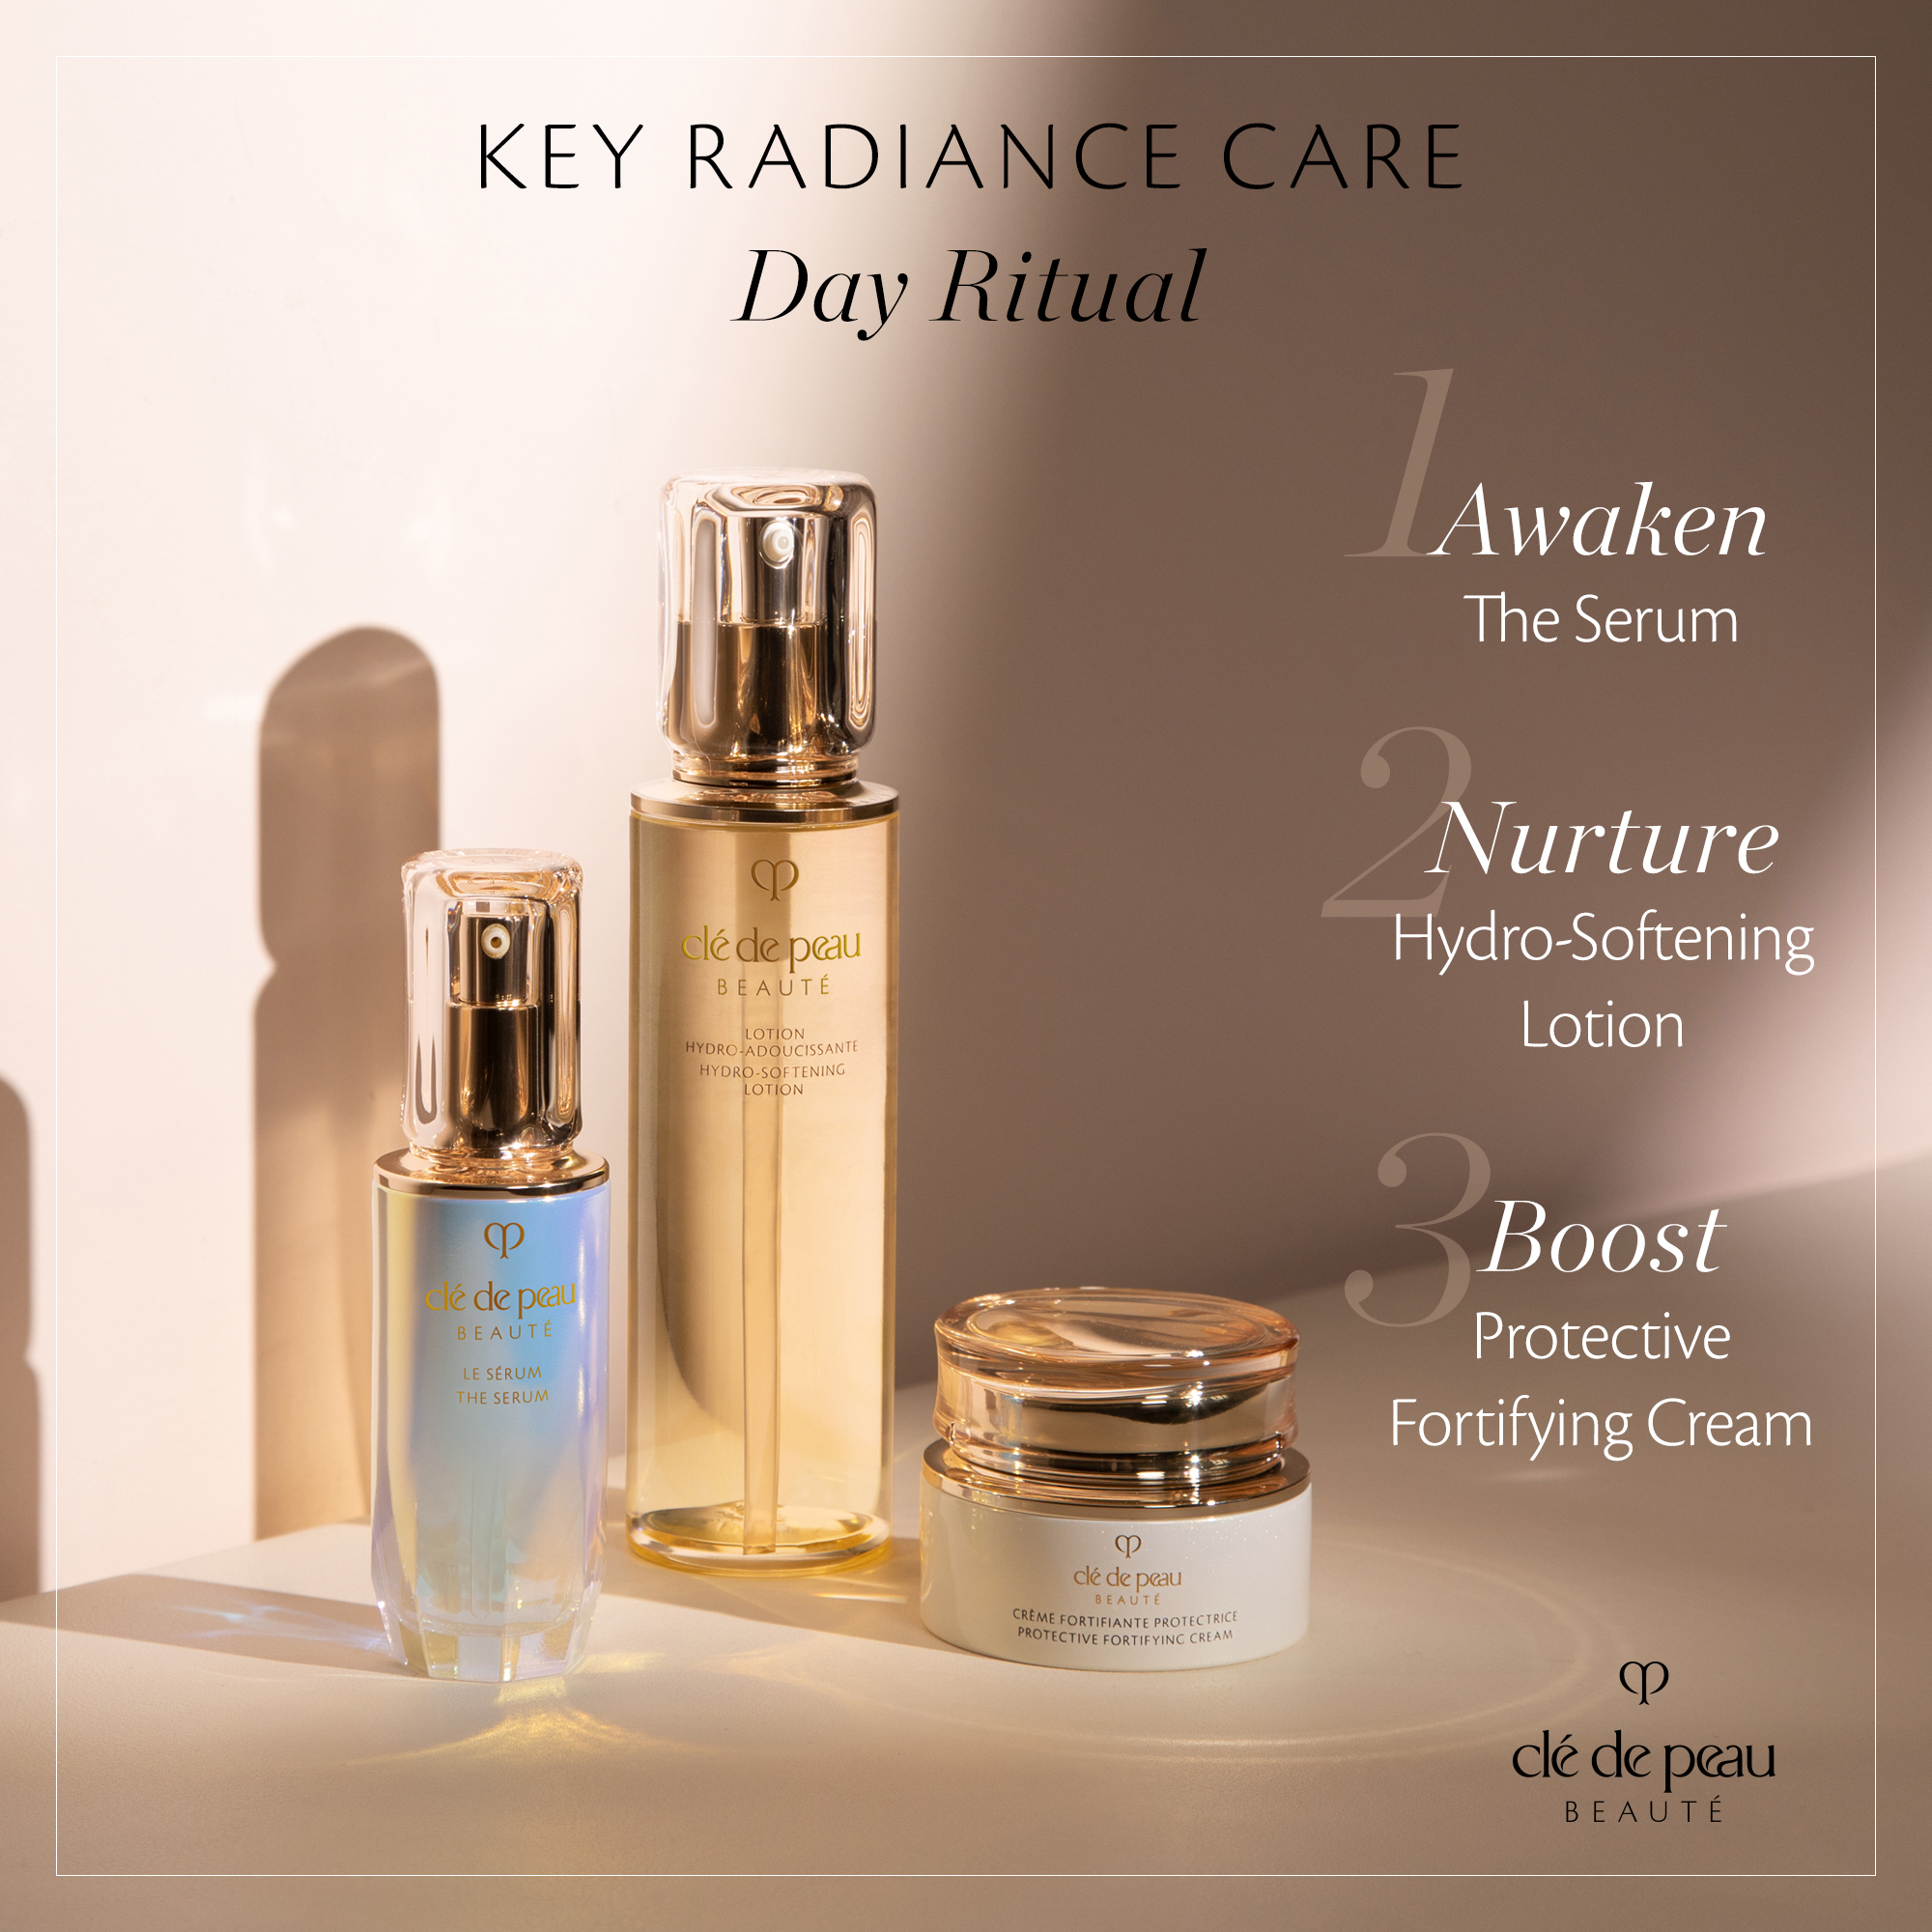 Key Radiance Care daily ritual, the serum, hydro-softening lotion, protective fortifying cream.